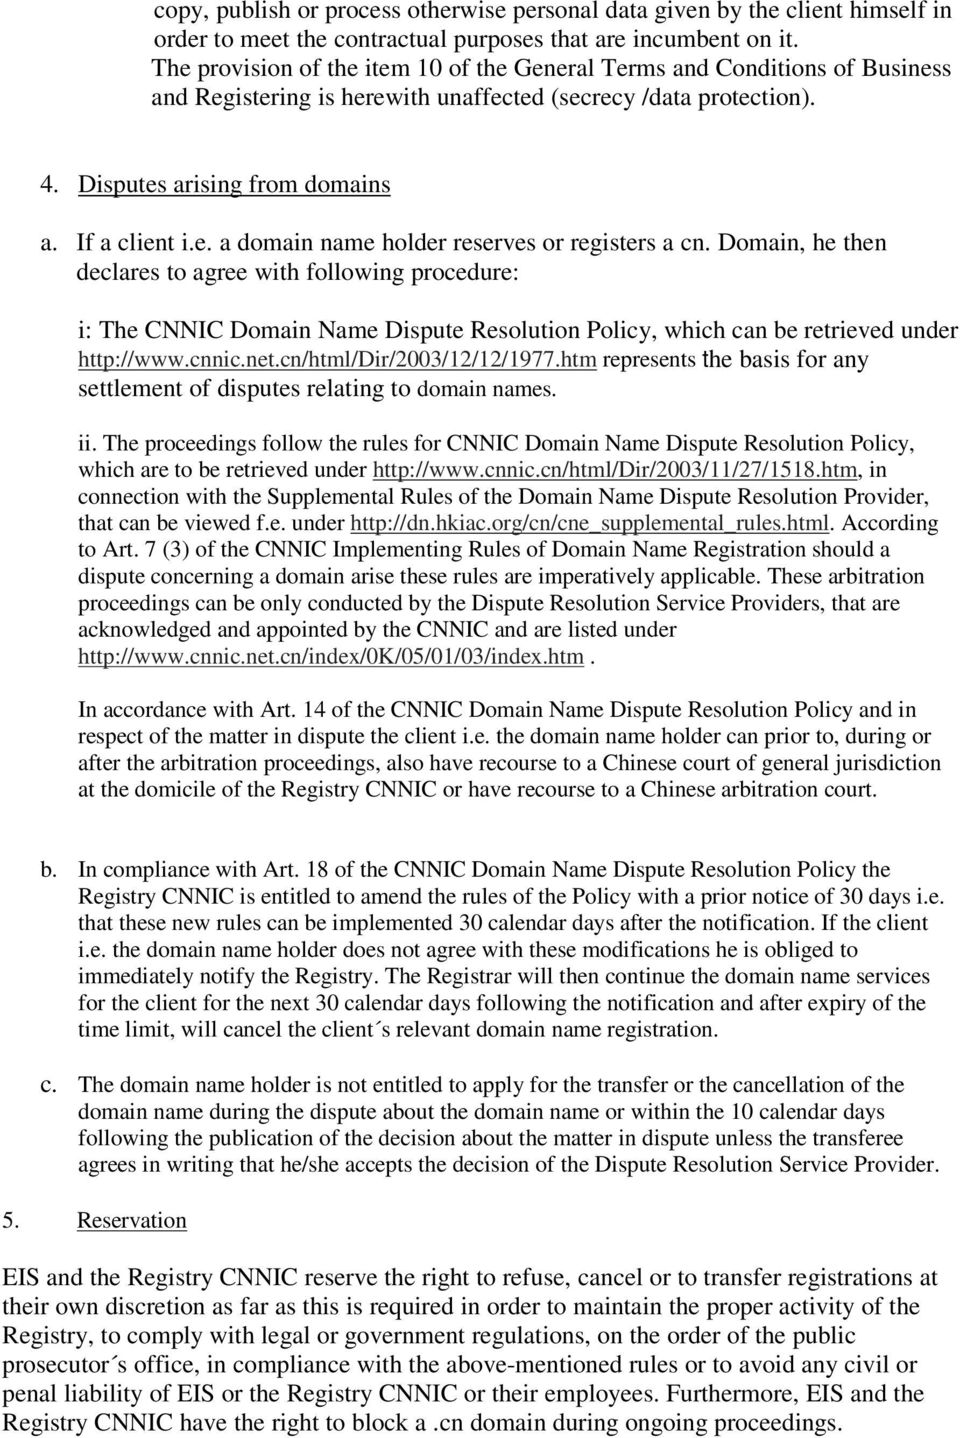 Domain, he then declares to agree with following procedure: i: The CNNIC Domain Name Dispute Resolution Policy, which can be retrieved under http://www.cnnic.net.cn/html/dir/2003/12/12/1977.